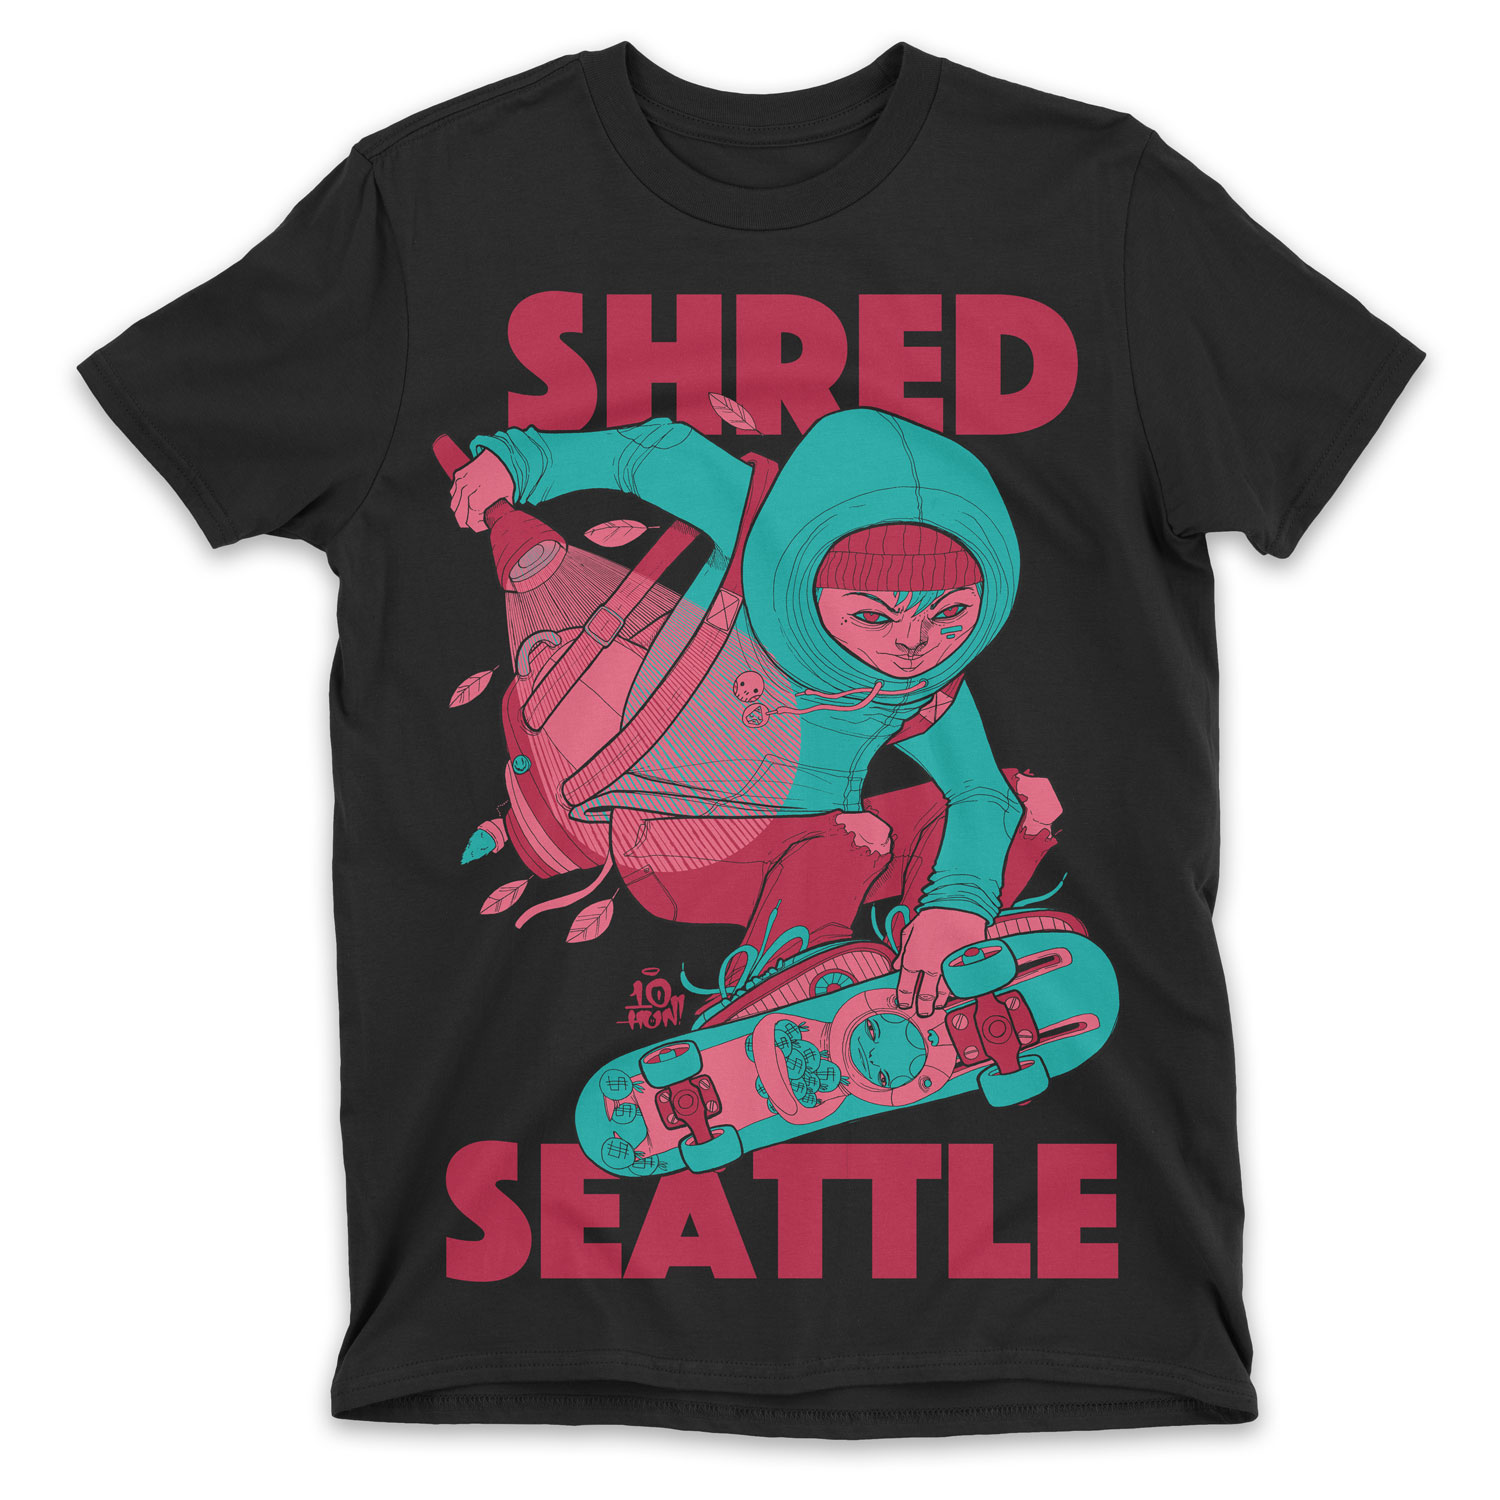 black shirt with a hooded skateboarder and the words Shred Seattle